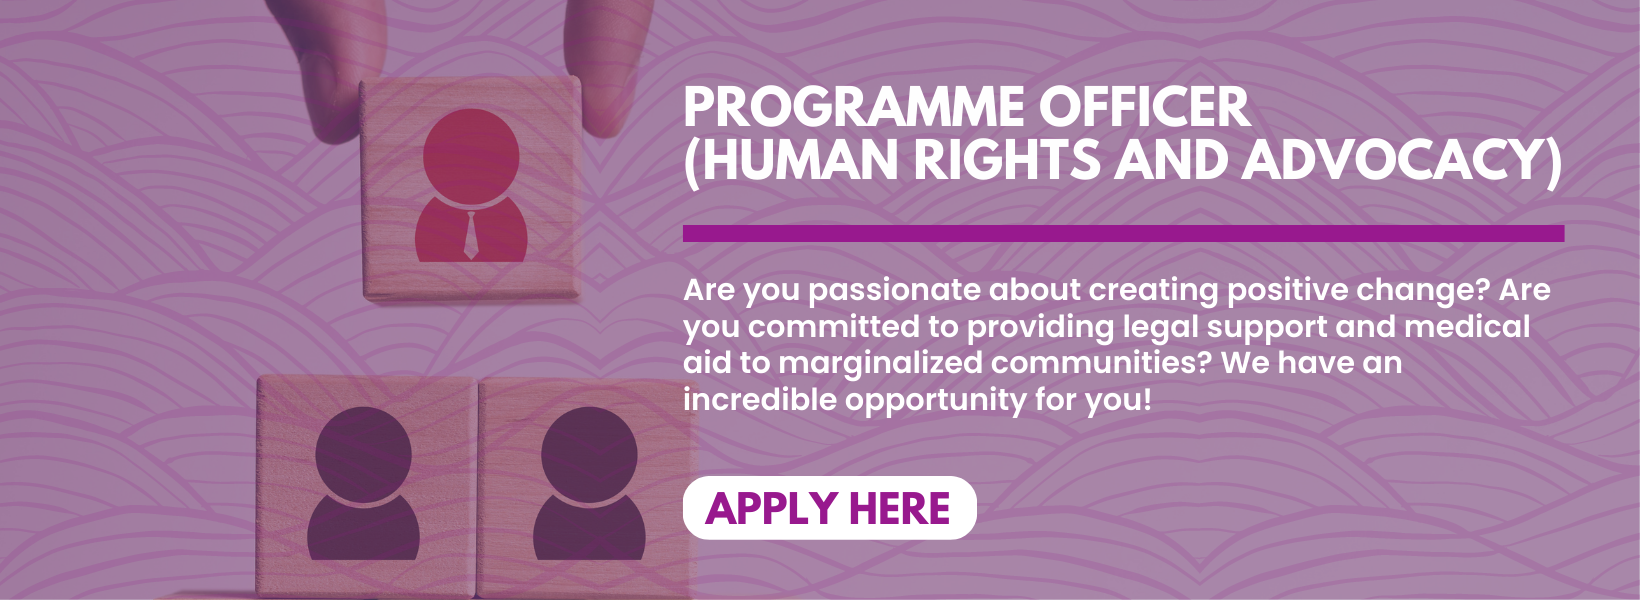 We Are Hiring: Programme Officer (Human Rights And Advocacy)  Wanted